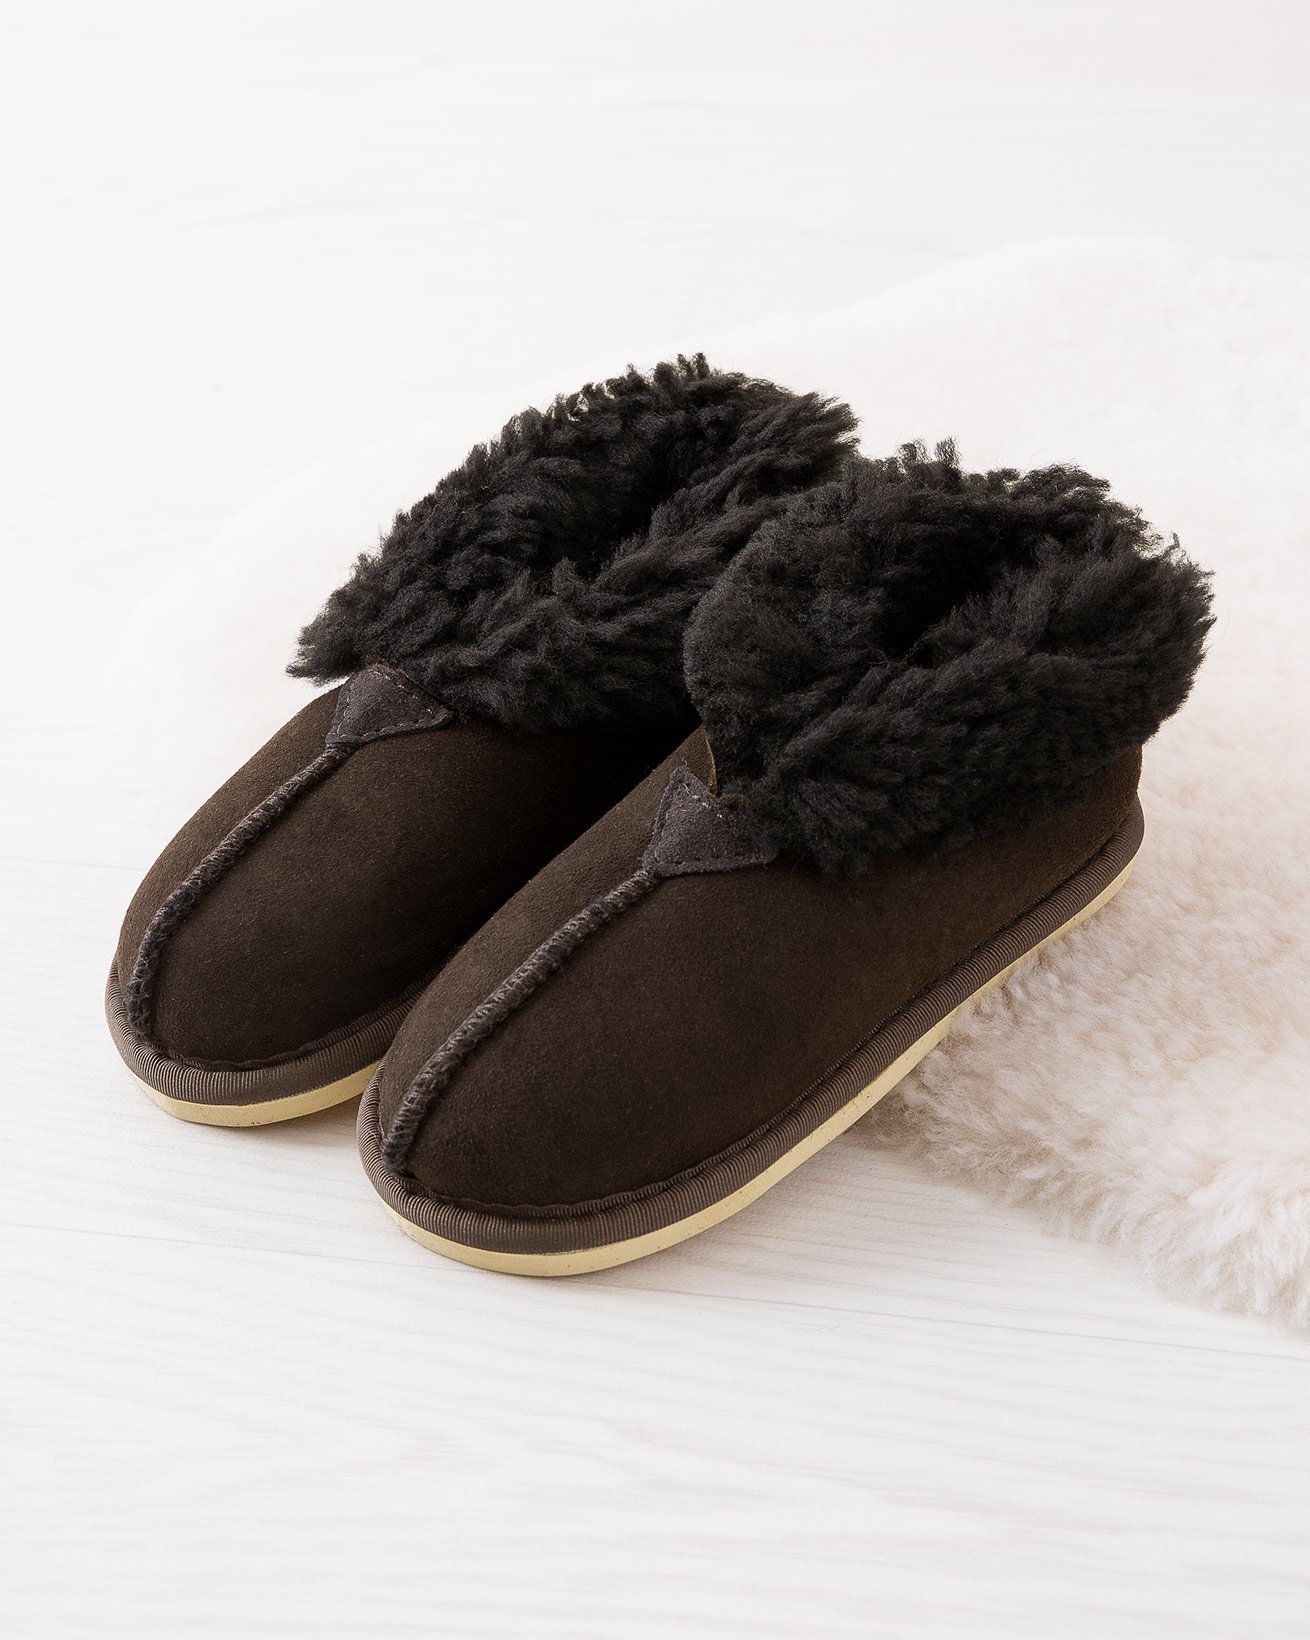 2460_kids-bootee-slippers_mocca_lifestyle_lfs.jpg